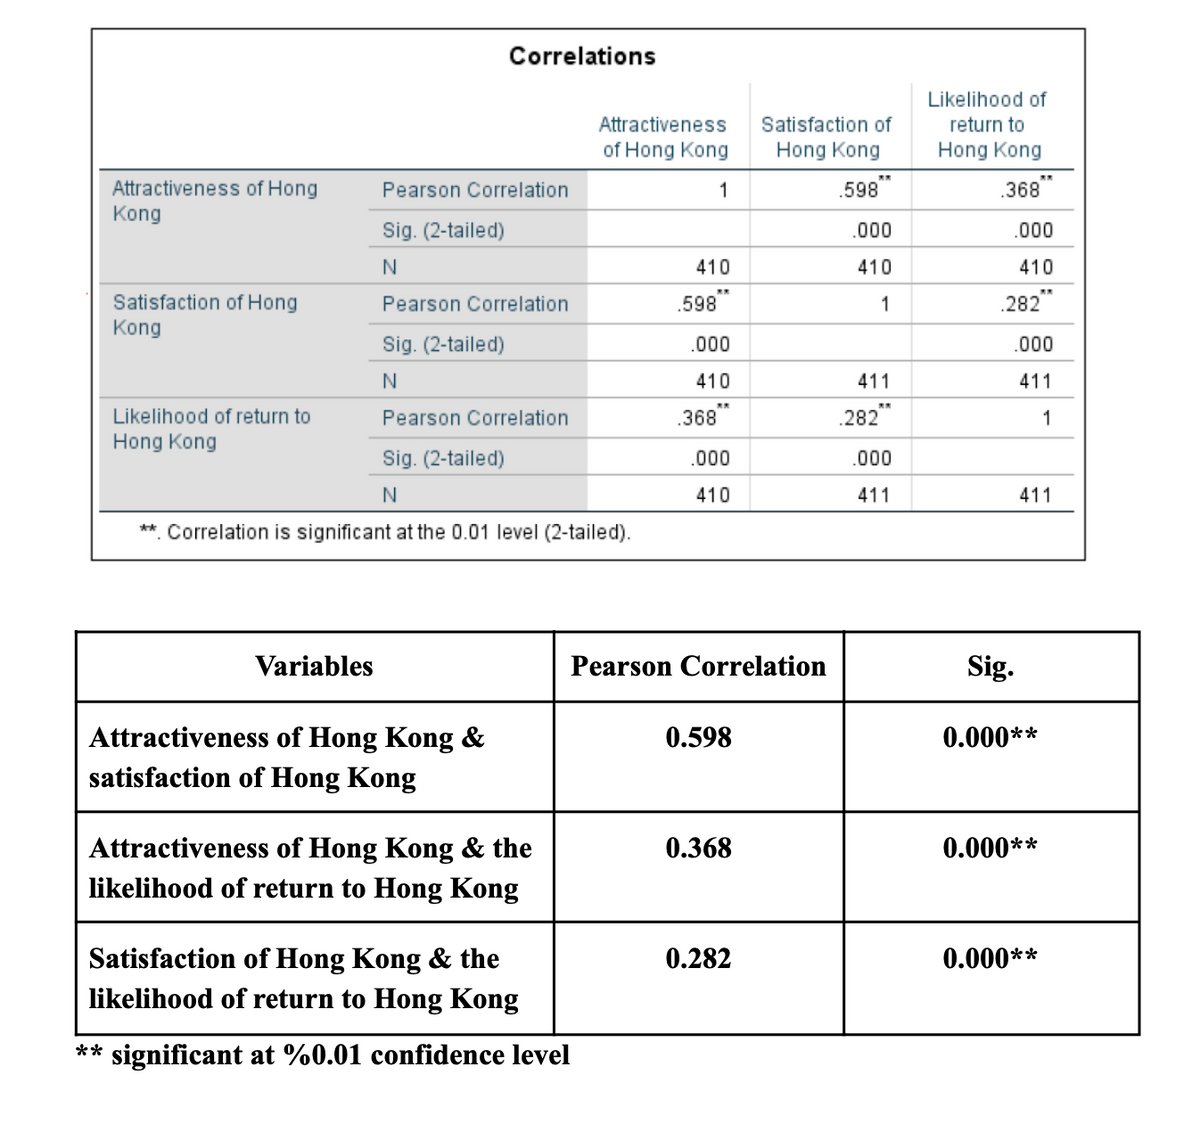 Correlations
Likelihood of
Attractiveness
Satisfaction of
return to
of Hong Kong
Hong Kong
Hong Kong
Attractiveness of Hong
Kong
Pearson Correlation
1
.598
.368
Sig. (2-tailed)
.000
.000
410
410
410
.282"
Satisfaction of Hong
Kong
Pearson Correlation
.598
1
Sig. (2-tailed)
.000
.000
410
411
411
Likelihood of return to
Pearson Correlation
.368
.282"
1
Hong Kong
Sig. (2-tailed)
.000
.000
410
411
411
**. Correlation is significant at the 0.01 level (2-tailed).
Variables
Pearson Correlation
Sig.
Attractiveness of Hong Kong &
satisfaction of Hong Kong
0.598
0.000**
Attractiveness of Hong Kong & the
likelihood of return to Hong Kong
0.368
0.000**
Satisfaction of Hong Kong & the
0.282
0.000**
likelihood of return to Hong Kong
significant at %0.01 confidence level
**
